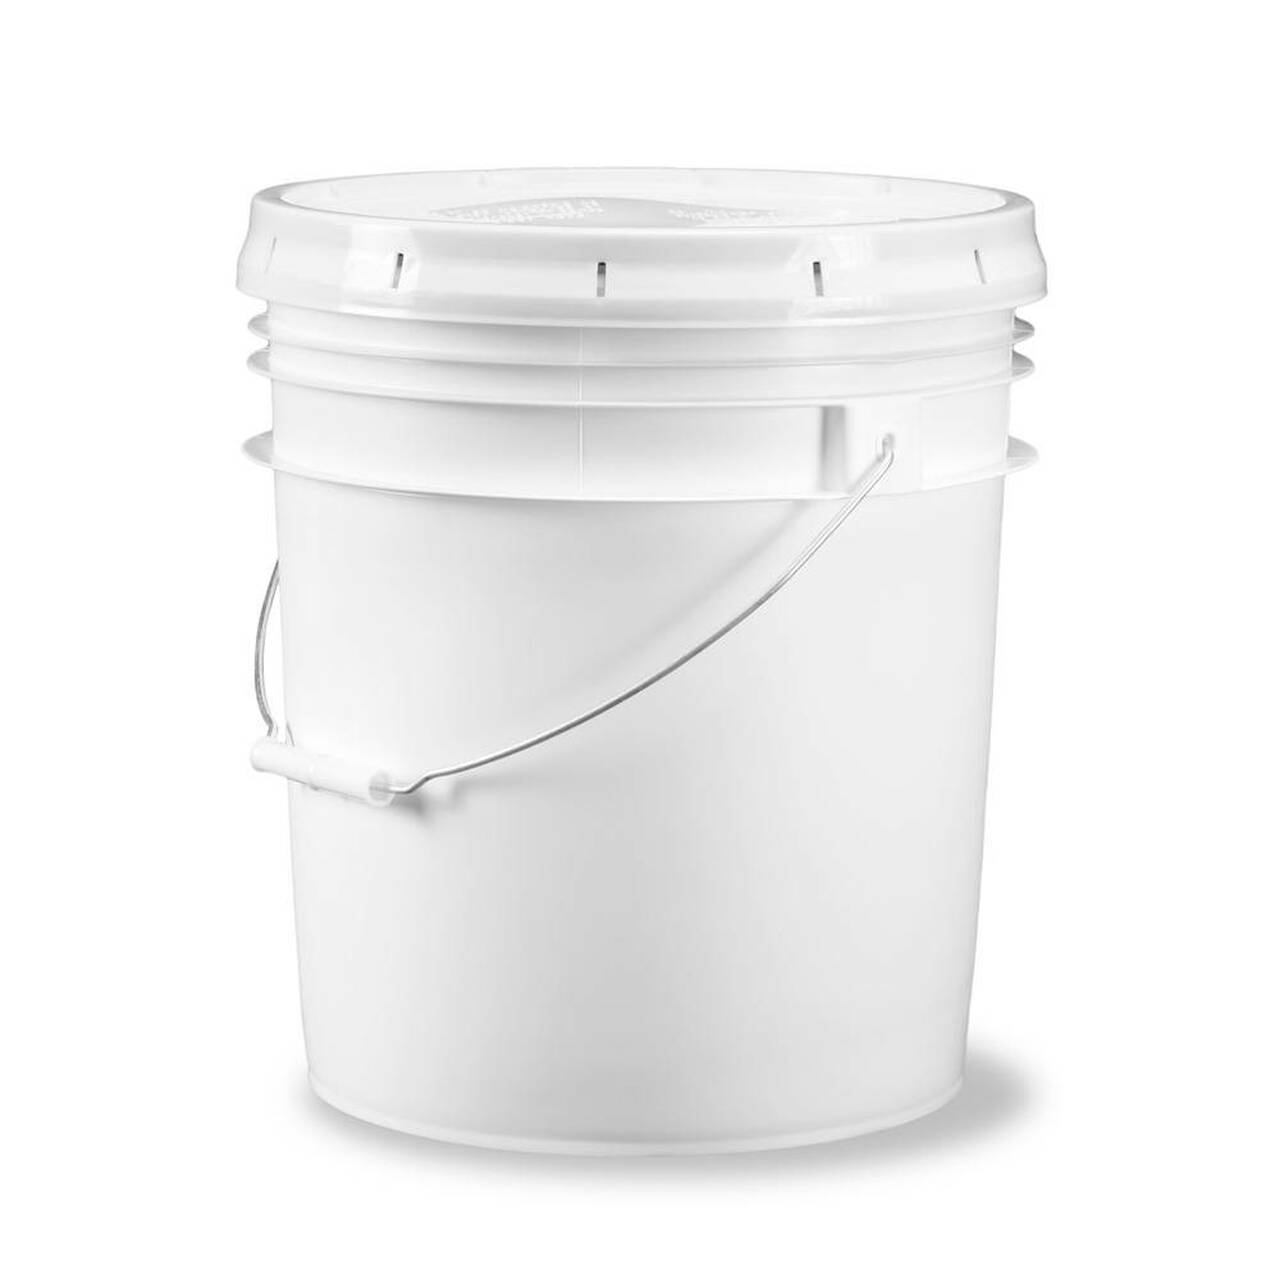 6 Gallon Premium Titanfood Storage Bucket With Rubber Gasket And Lid